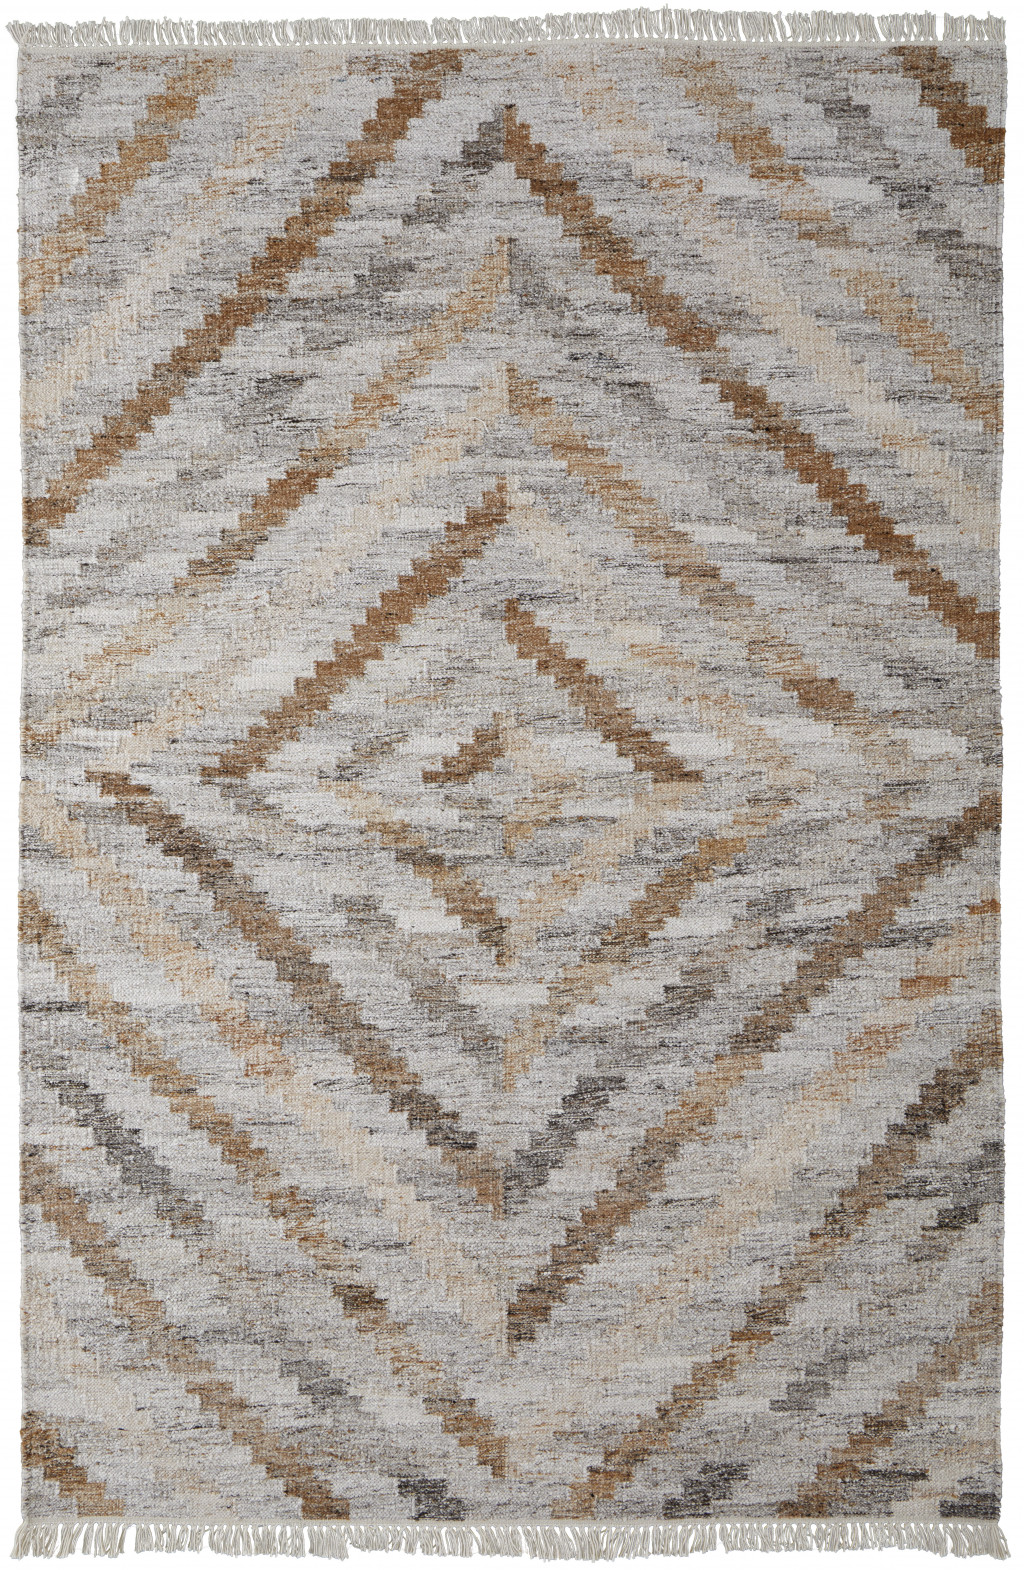 8' X 10' Ivory Gray And Tan Geometric Hand Woven Stain Resistant Area Rug With Fringe-512424-1